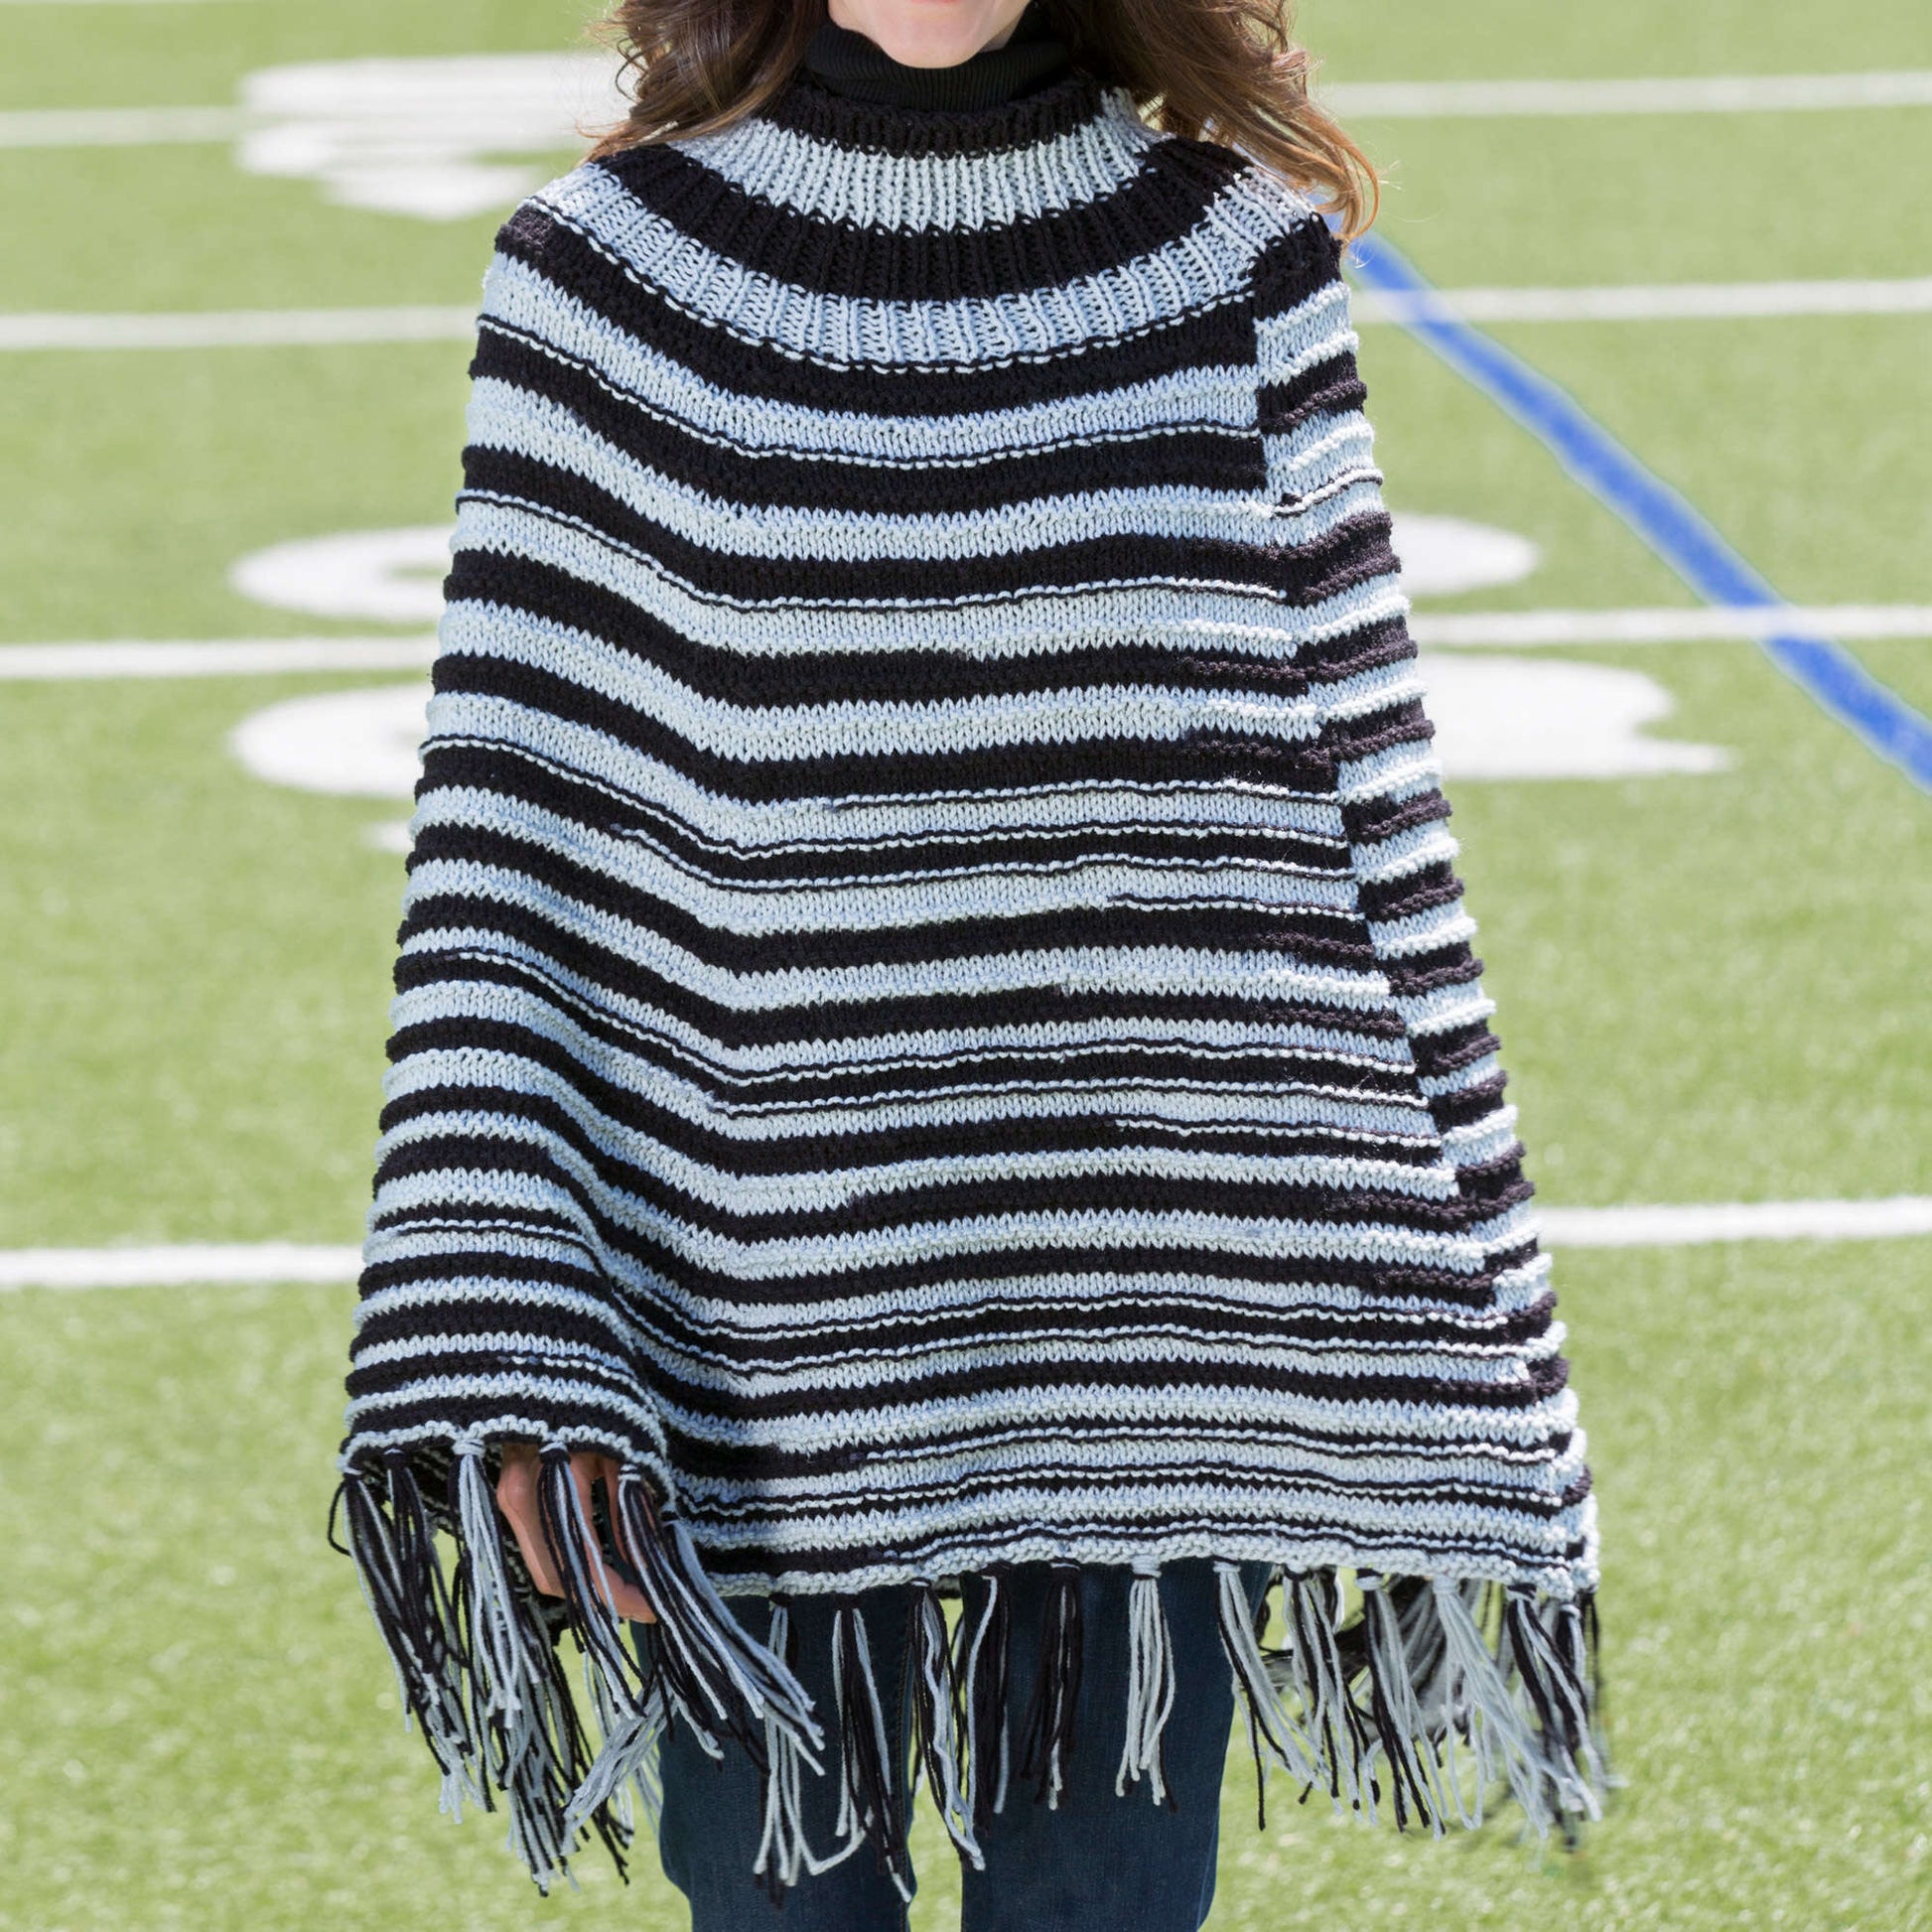 Free Red Heart Game Ready Knit Poncho Pattern